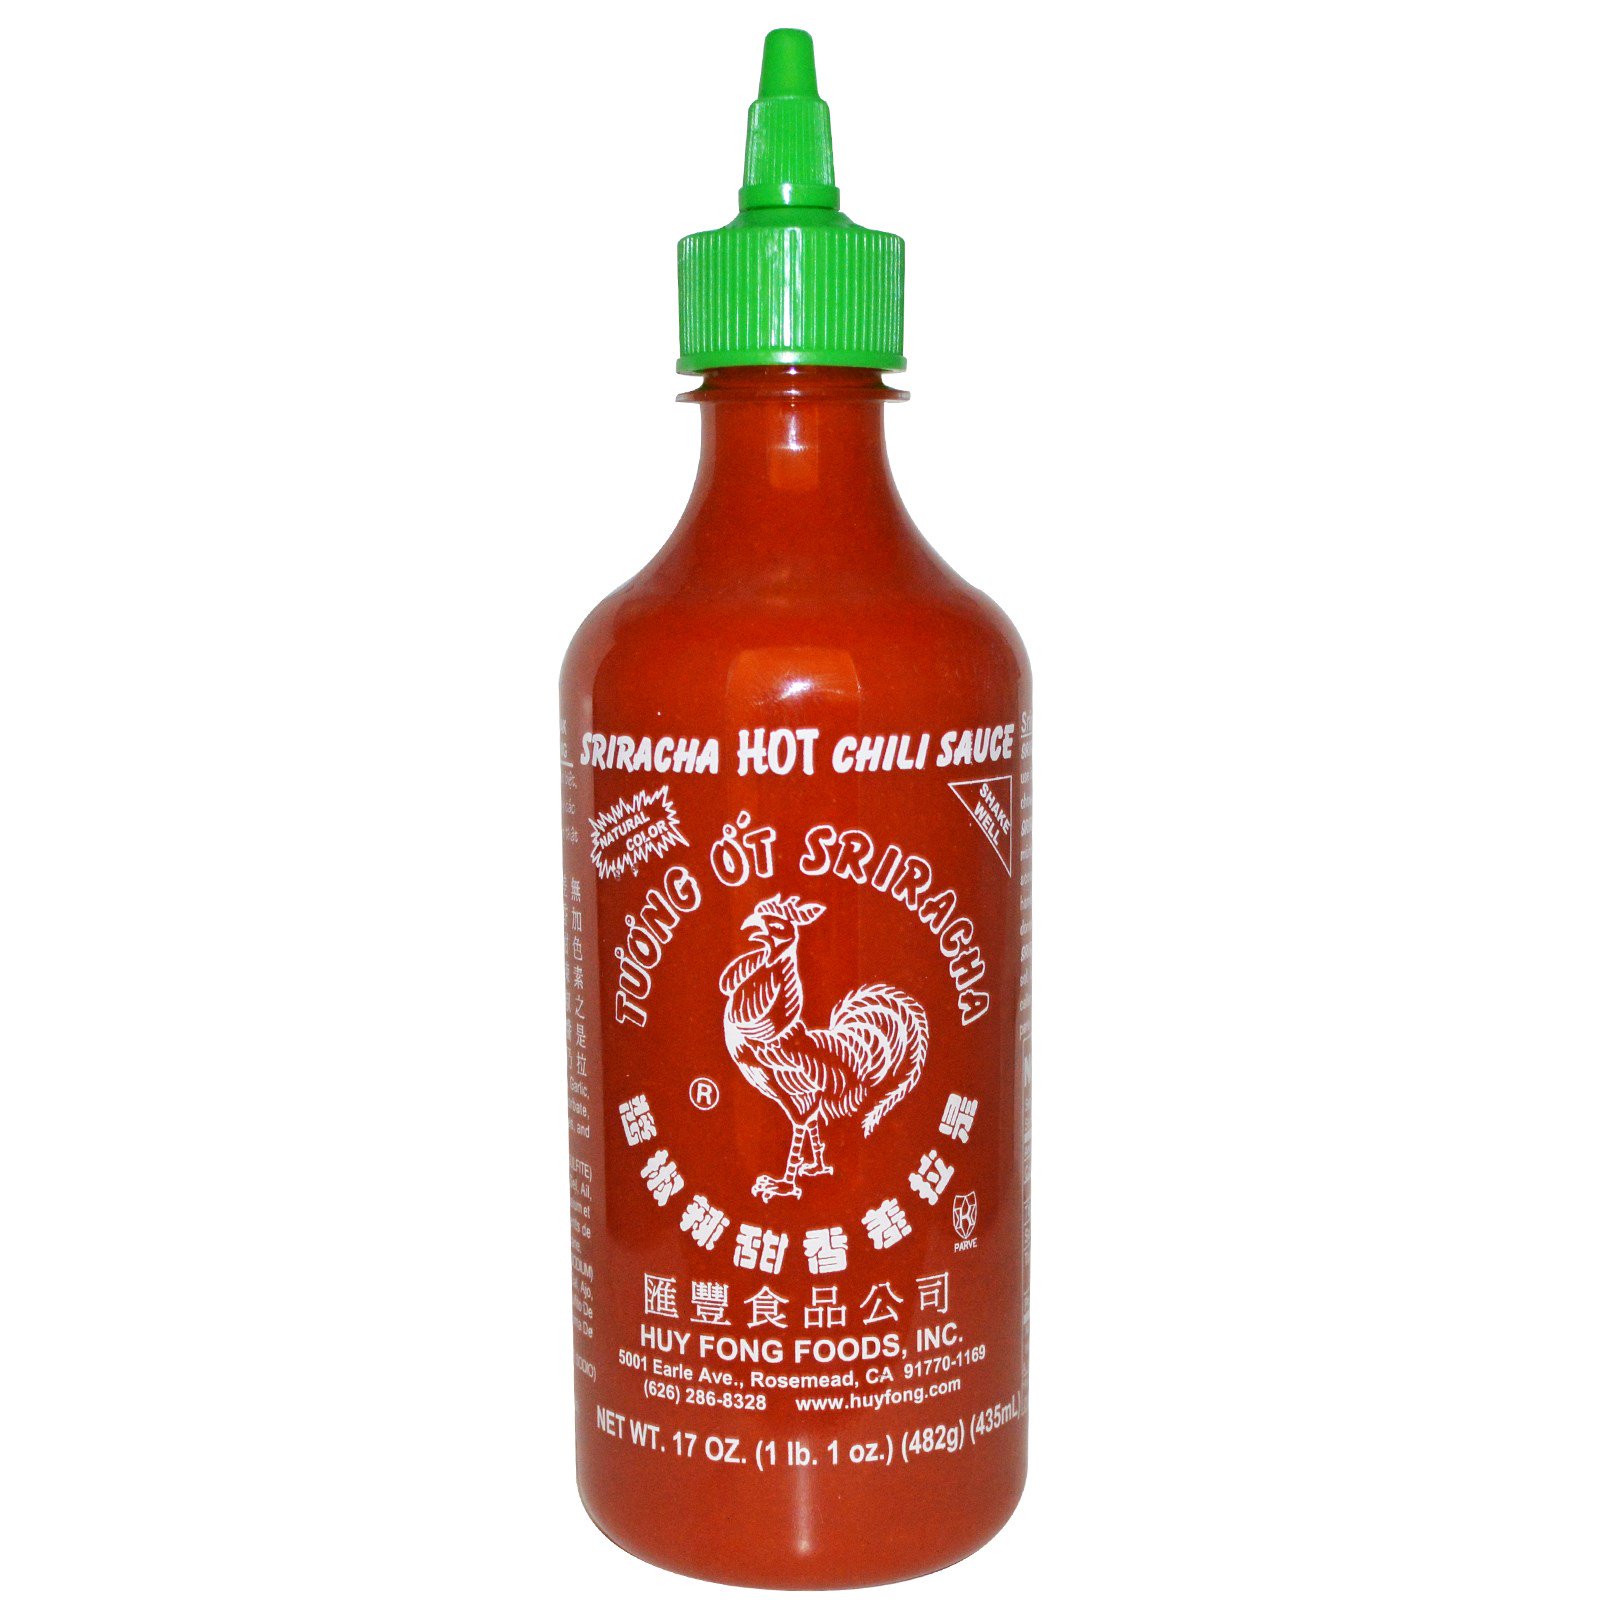 All the fonts on a sriracha bottle, except one